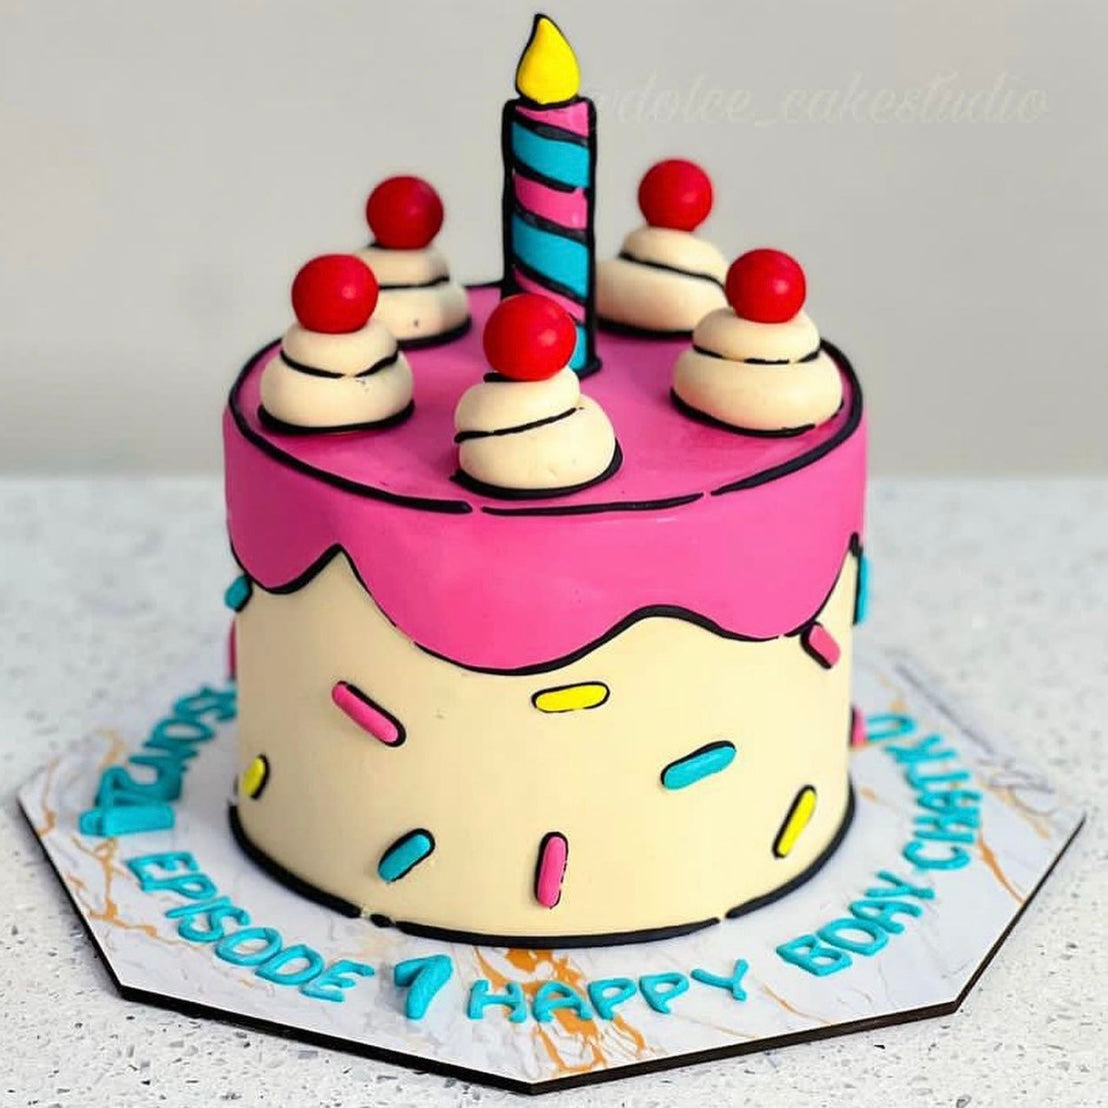 Happy Birthday cake gif – free download, tap to send ecard